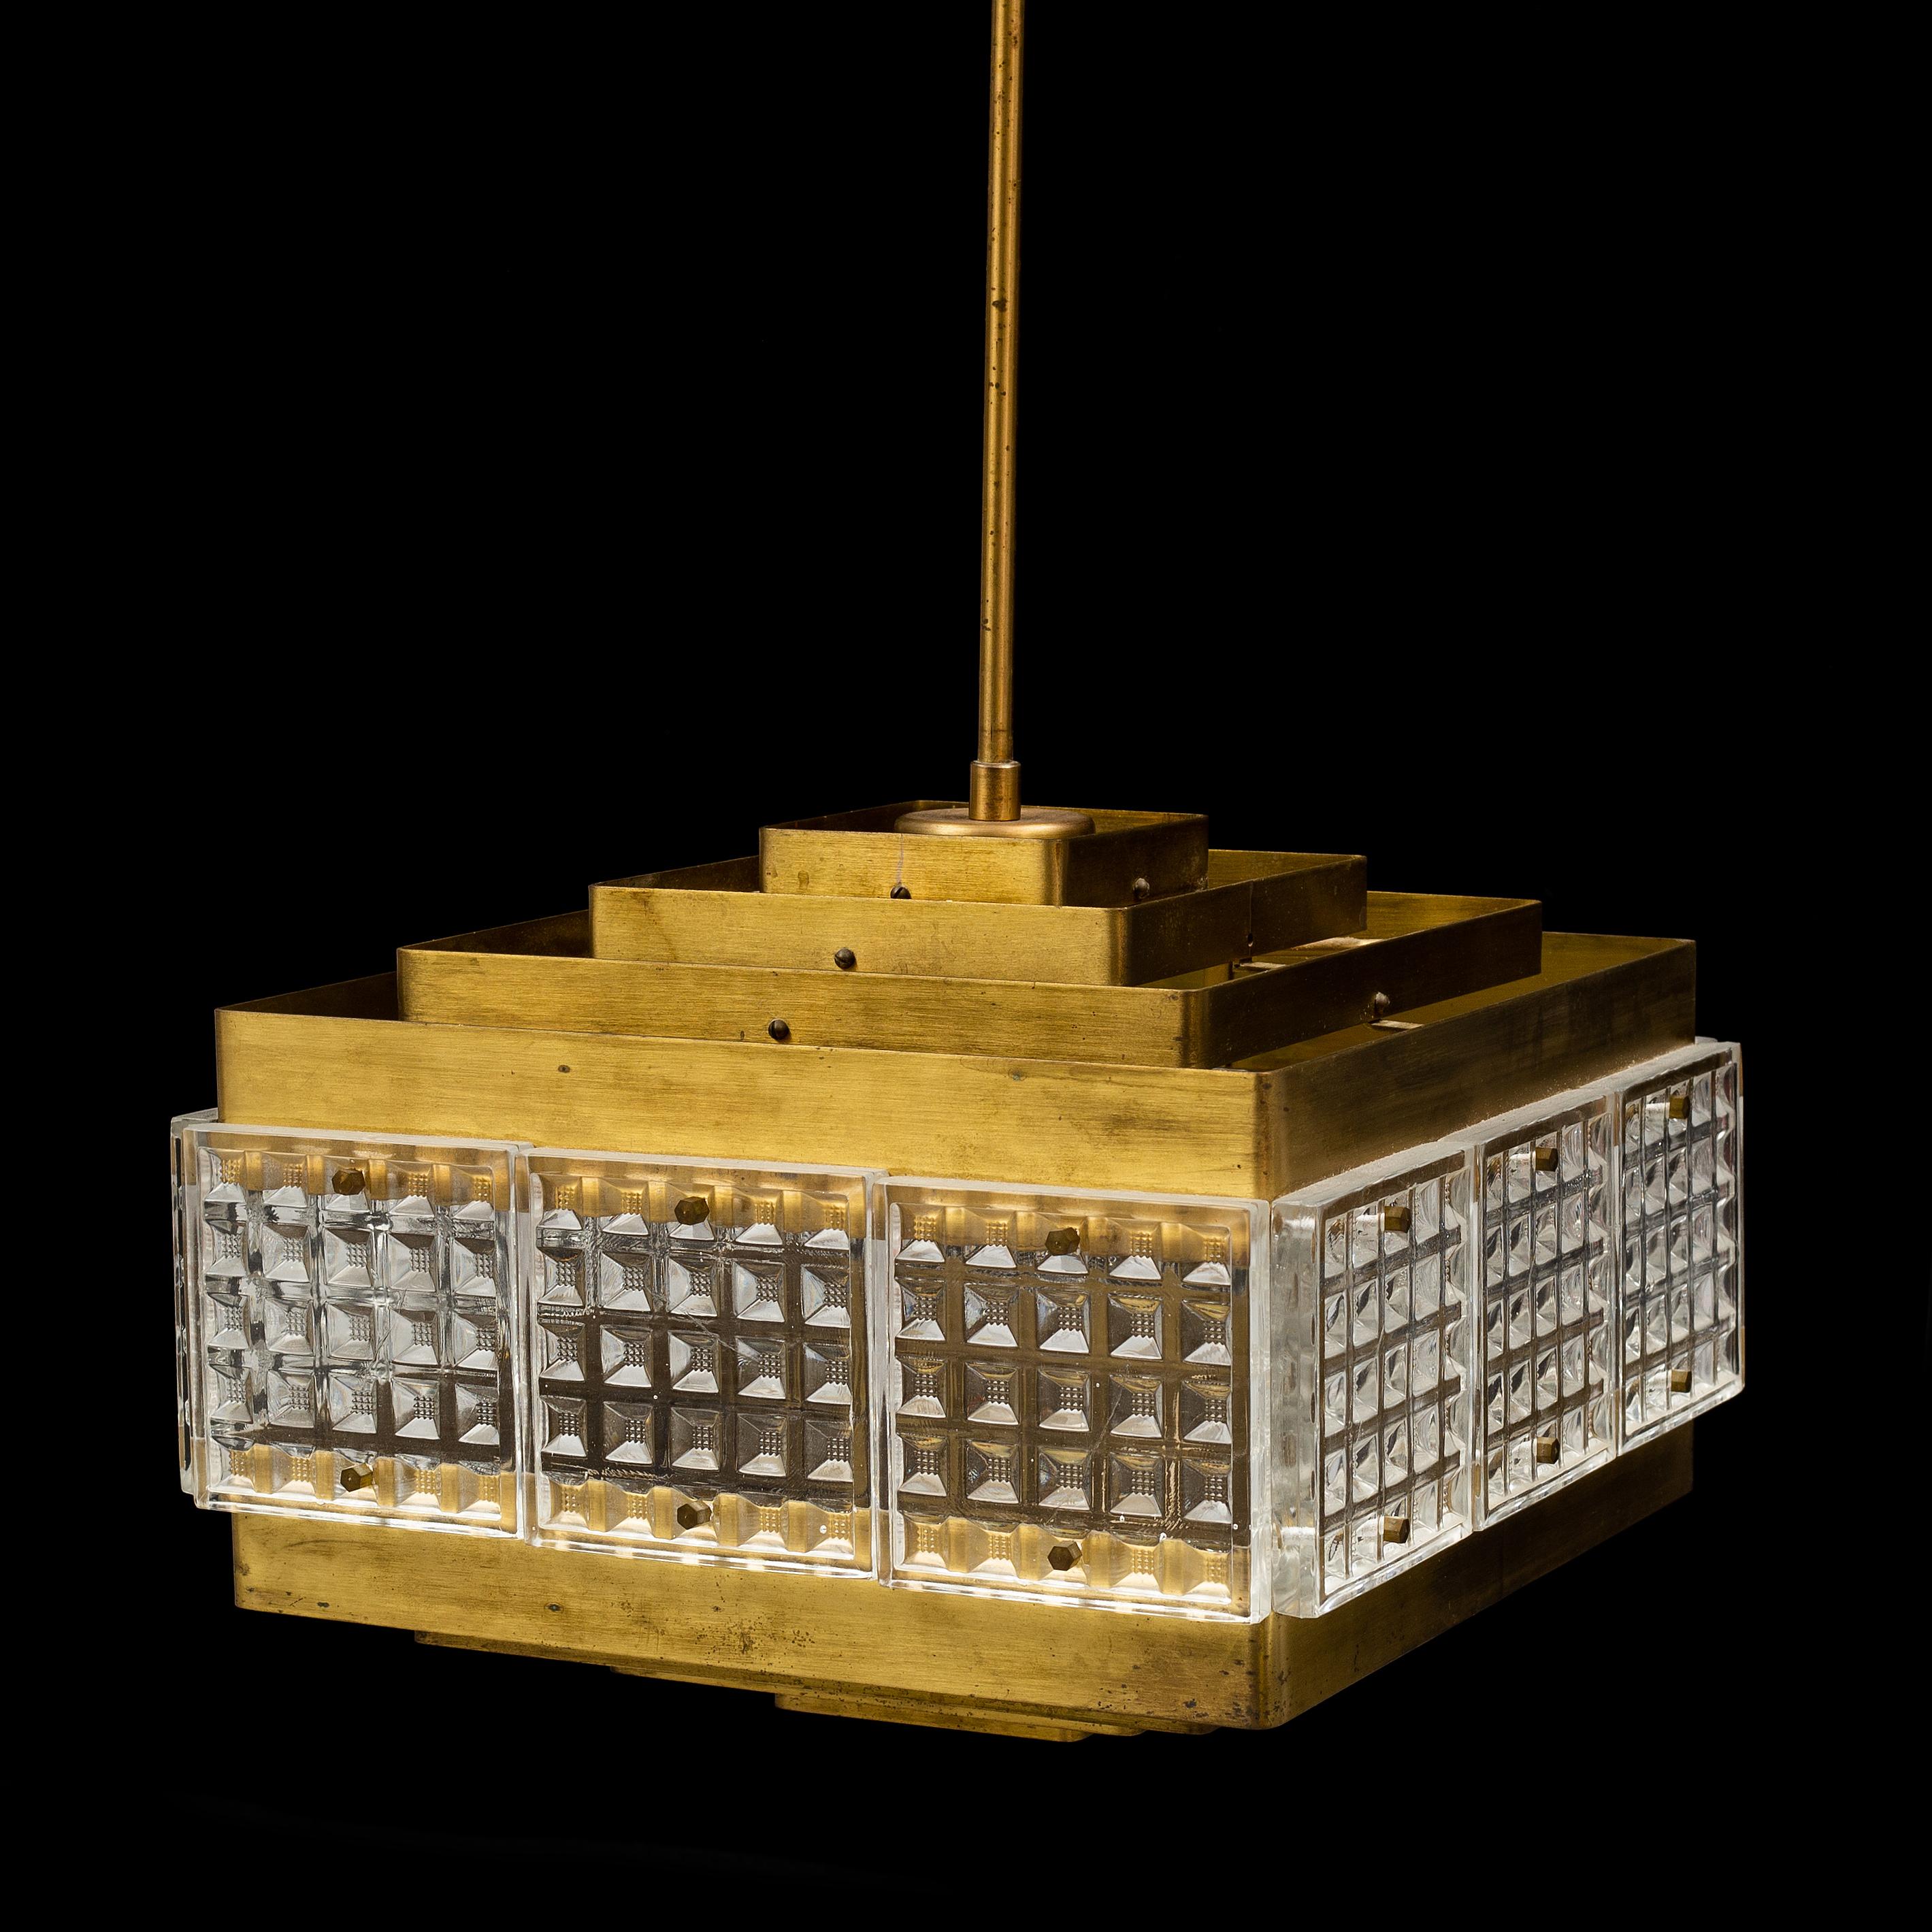 Orrefors pendant light glass and brass, Sweden, 1960
A very rare model in good condition.
